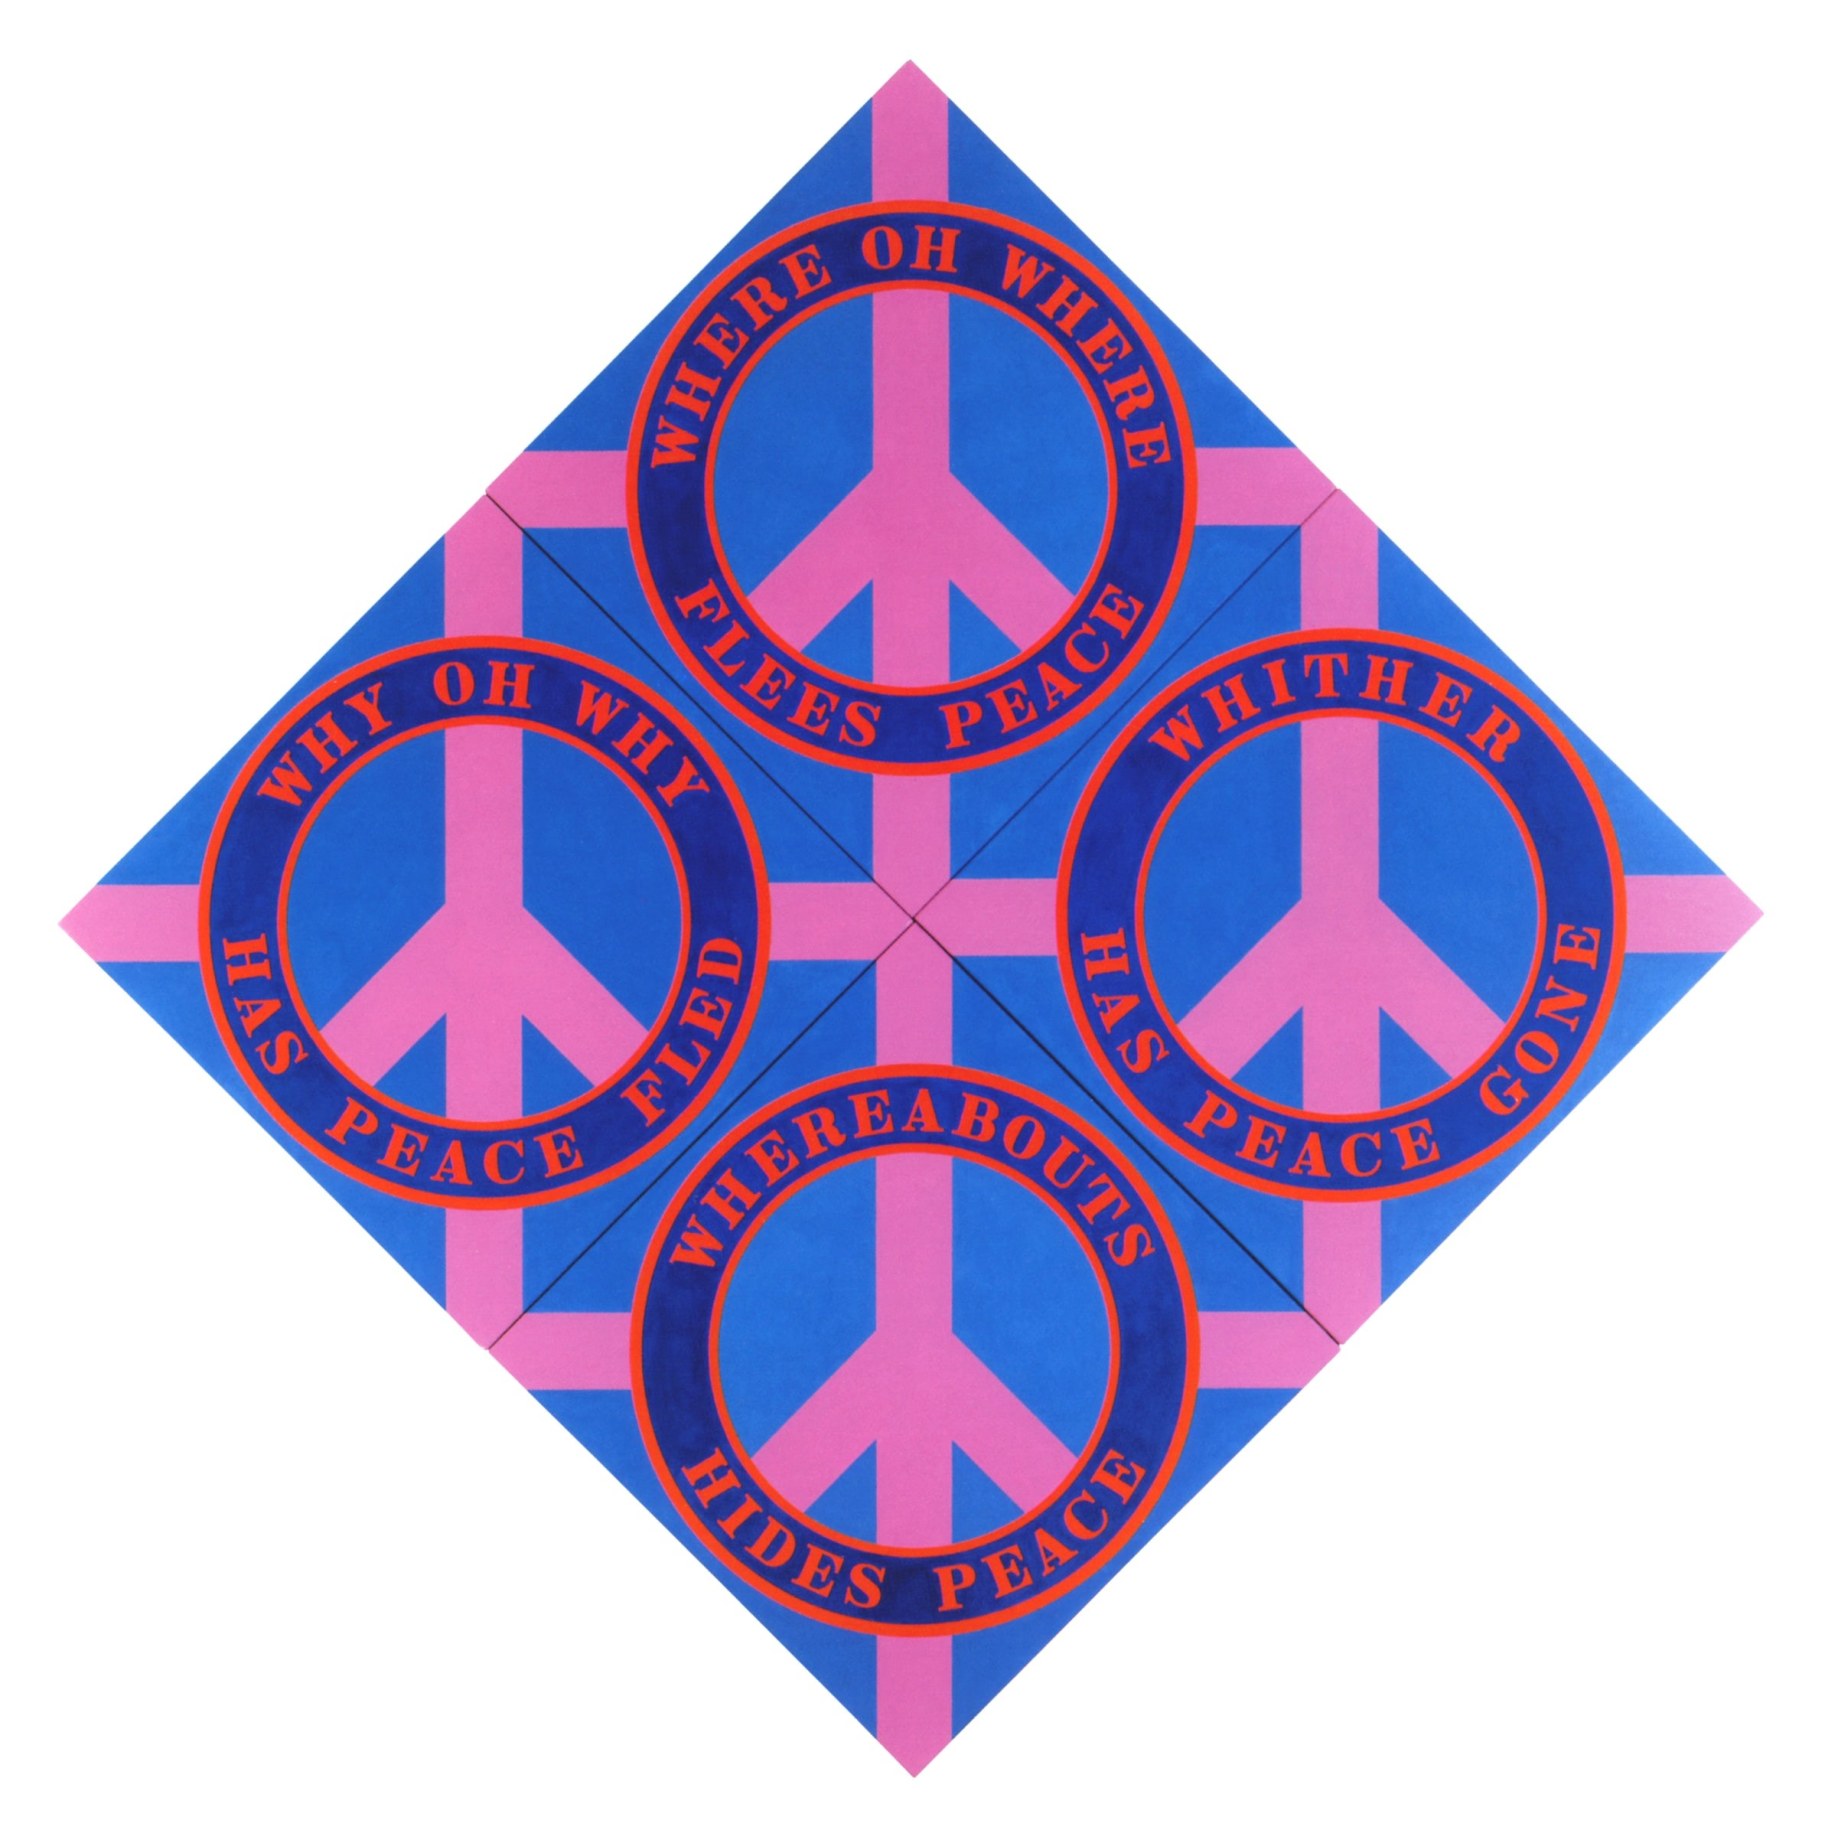 Four Diamond Peace is a diamond shaped painting comprised of four panels, measuring 101 by 101 inches overall. The panels have a blue ground, and each panel is dominated by a pink peace sign facing upwards surrounded by a dark blue ring with red outlines. The rings containing text in red, reading, clockwise from top: &quot;Where Oh Where Flees Peace,&quot; &quot;Whither Has Peace Gone,&quot; &quot;Whereabouts Hides Peace,&quot; and &quot;Why Oh Why Has Peace Fled.&quot; Pink bands have been painted from the edge of the ring to the corner of each panel.